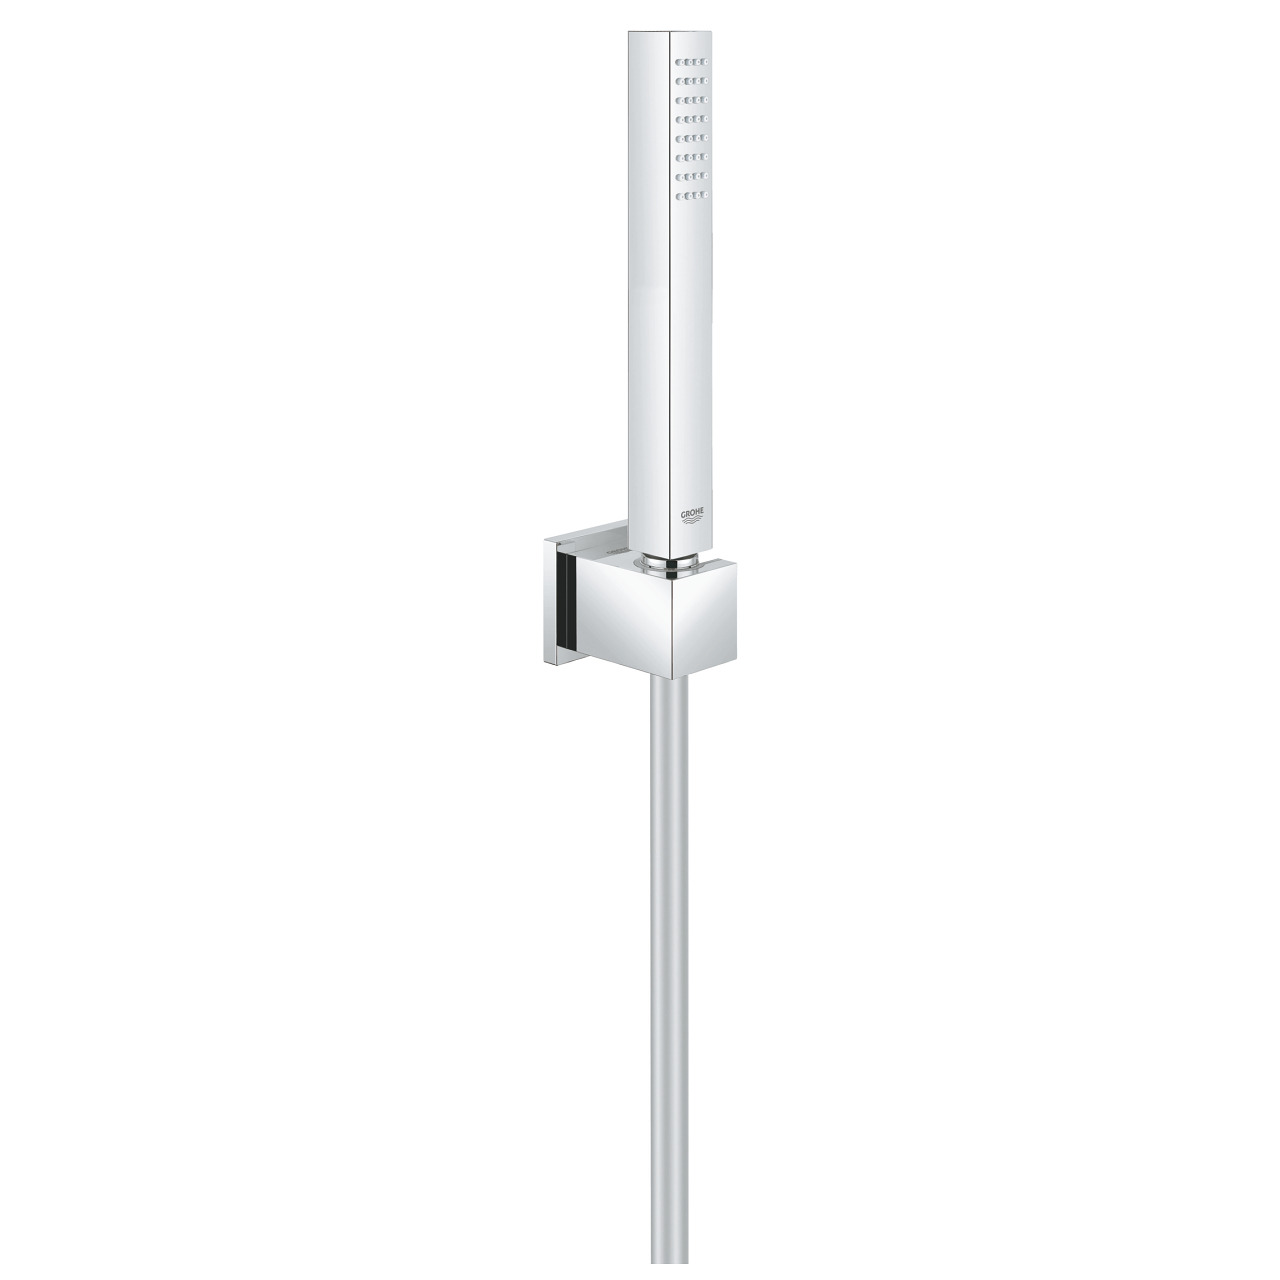 GROHE - Mitigeur Thermostatique Bain/Douche Grohtherm 800 - 2